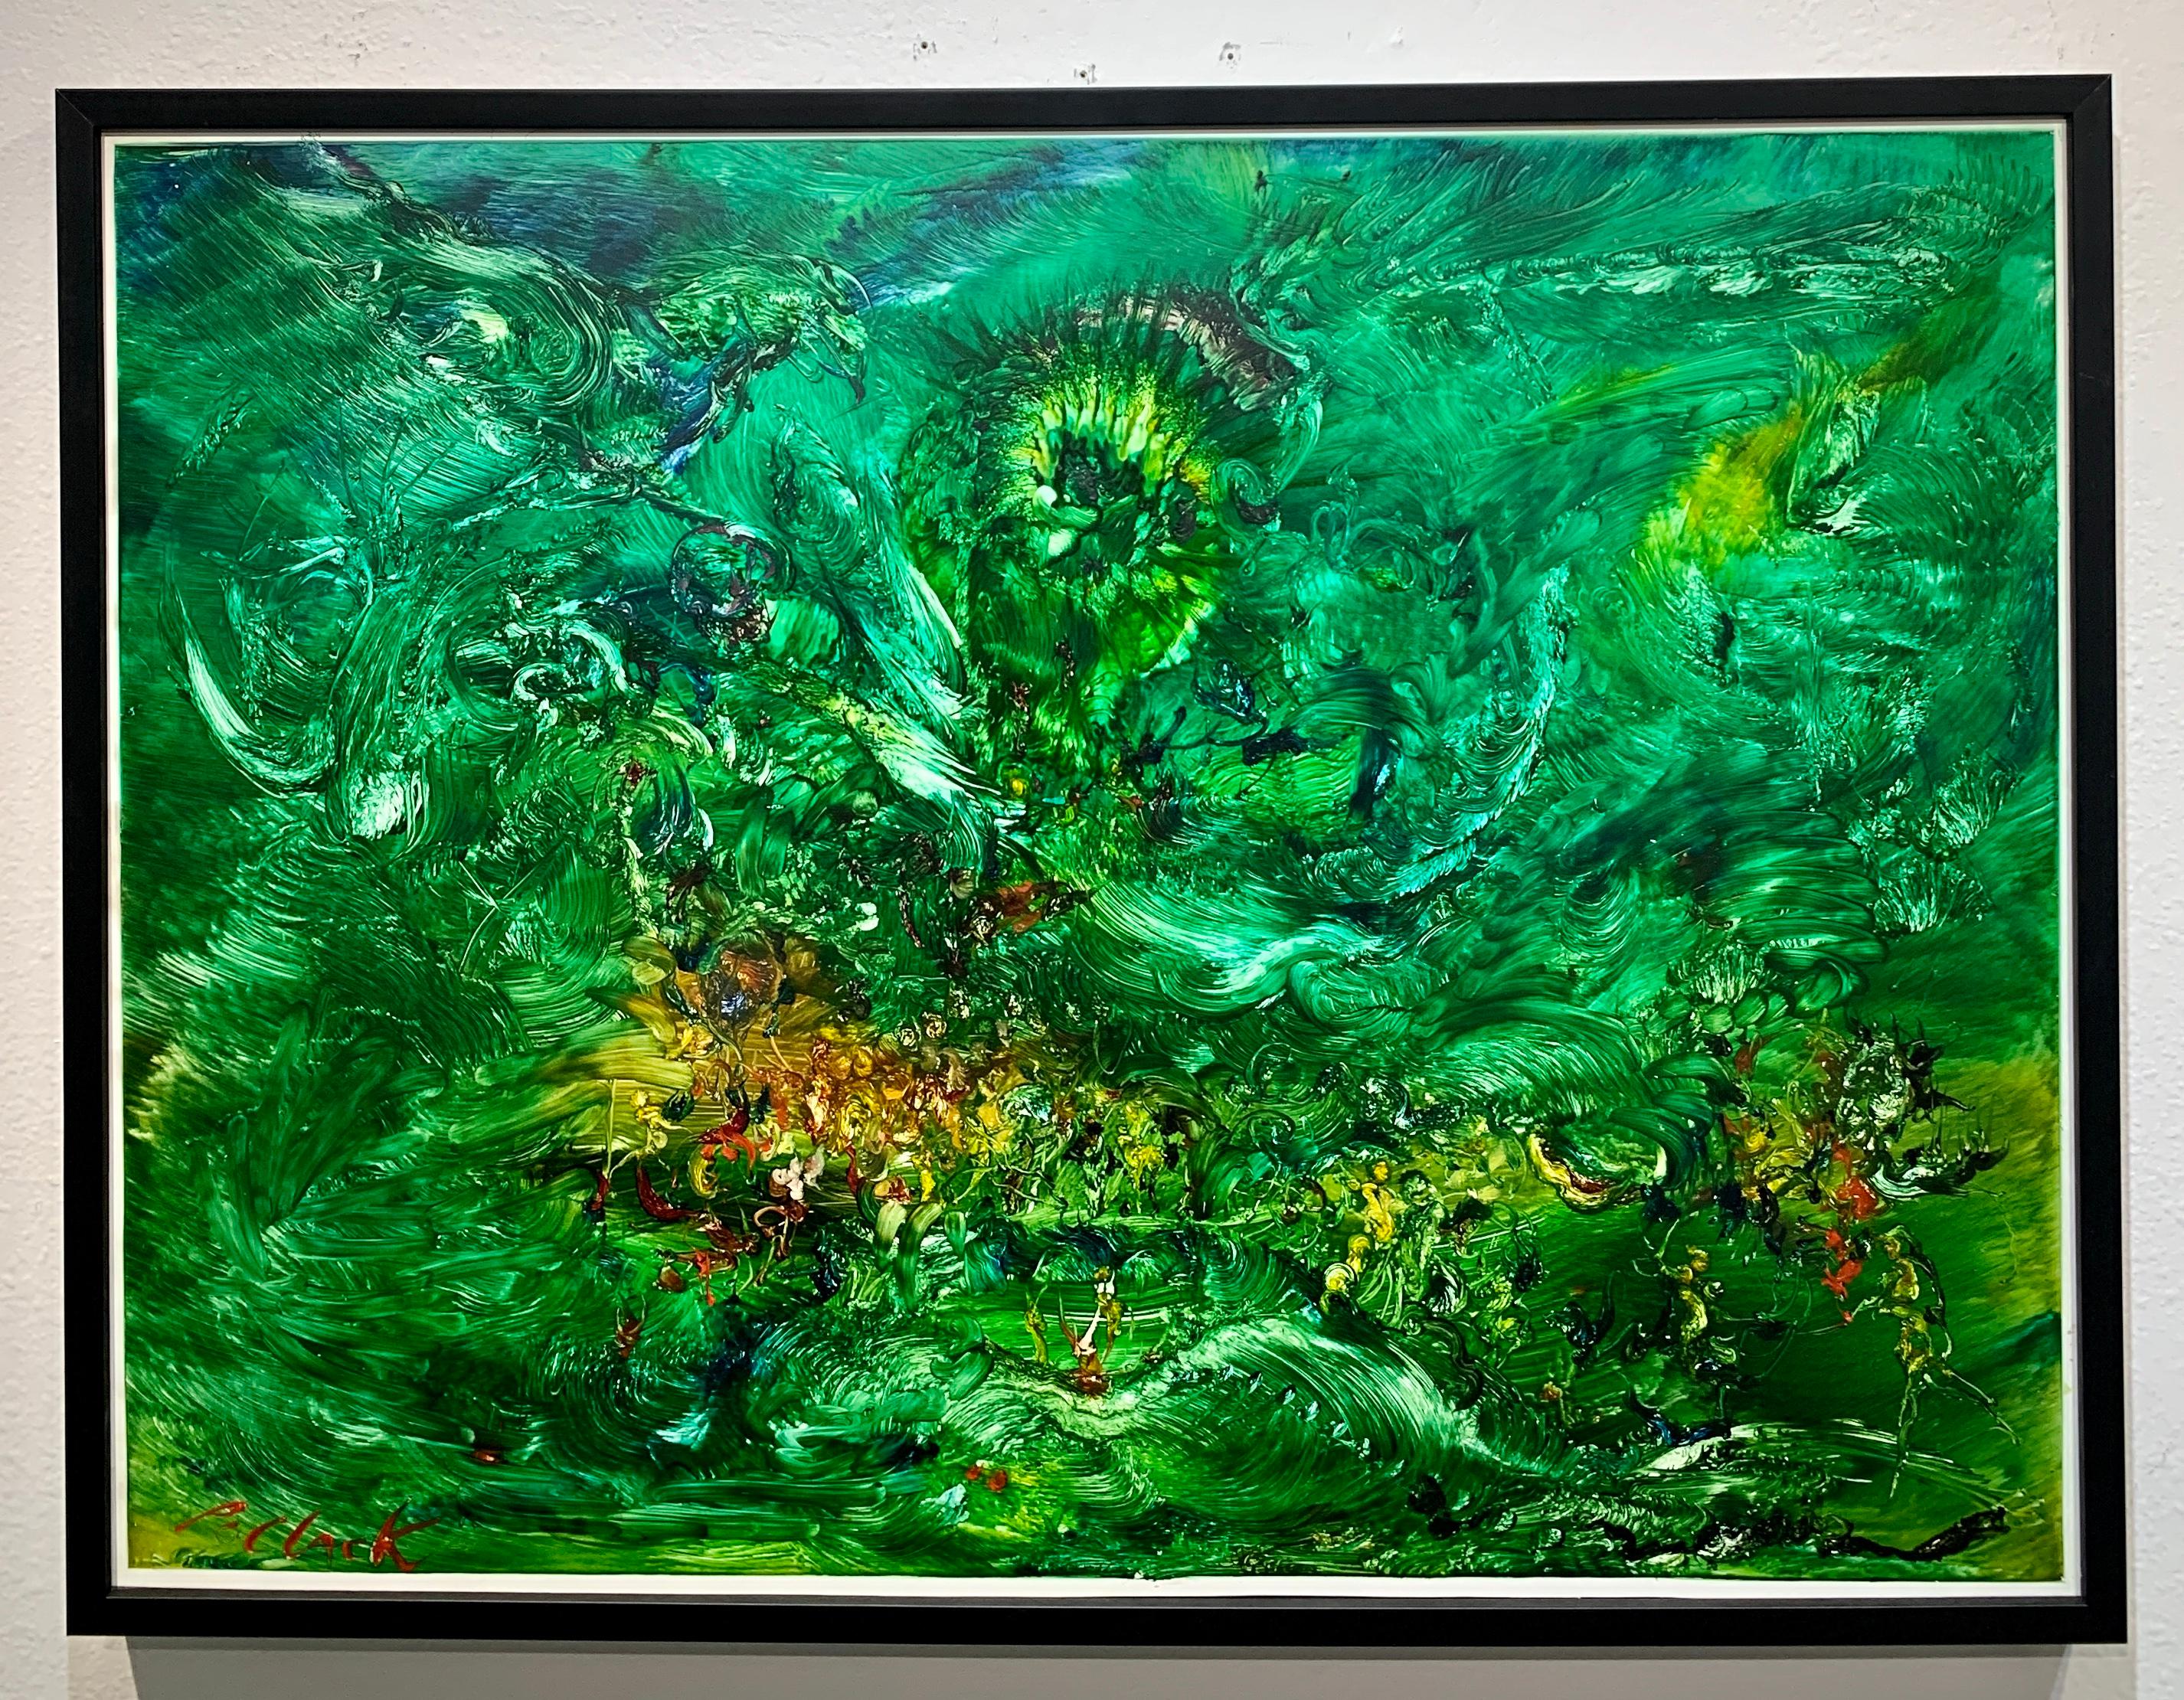 Forest Angel, Reginald Pollack Abstract Expressionist Oil Masonite Green

Oil on Masonite painting by late American Artist Reginald Pollack.  It has a 1/4